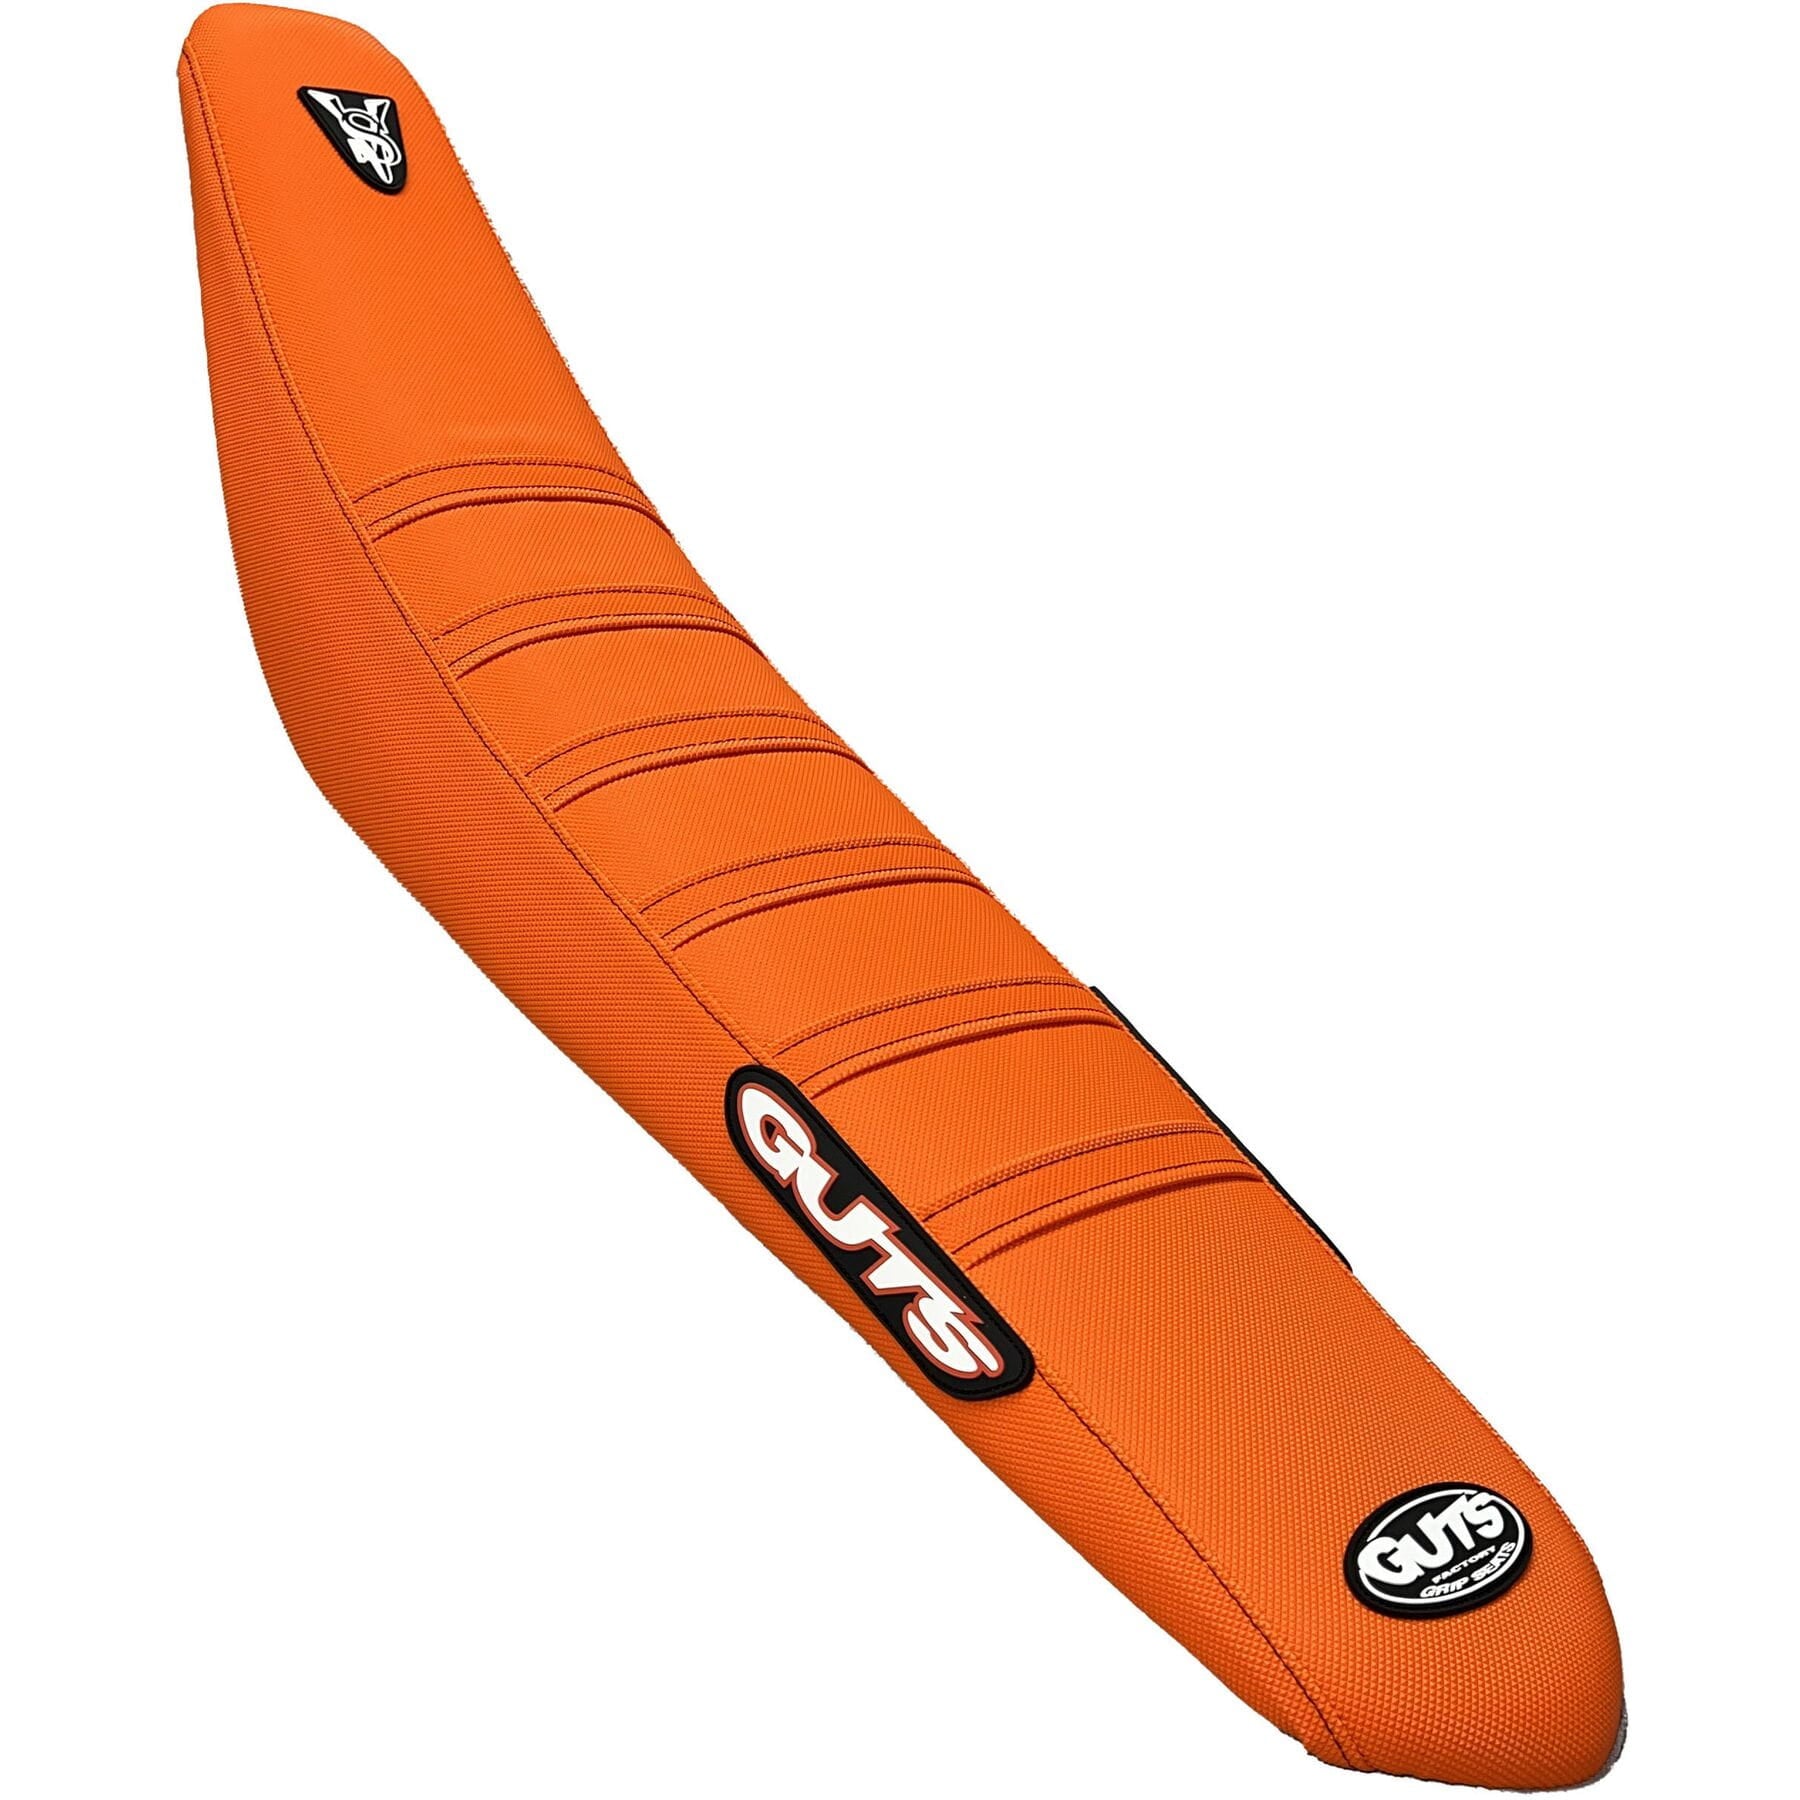 Guts VS Ribbed Seat cover Orange side/Orange Ribs and Top KTM SX85 18-23